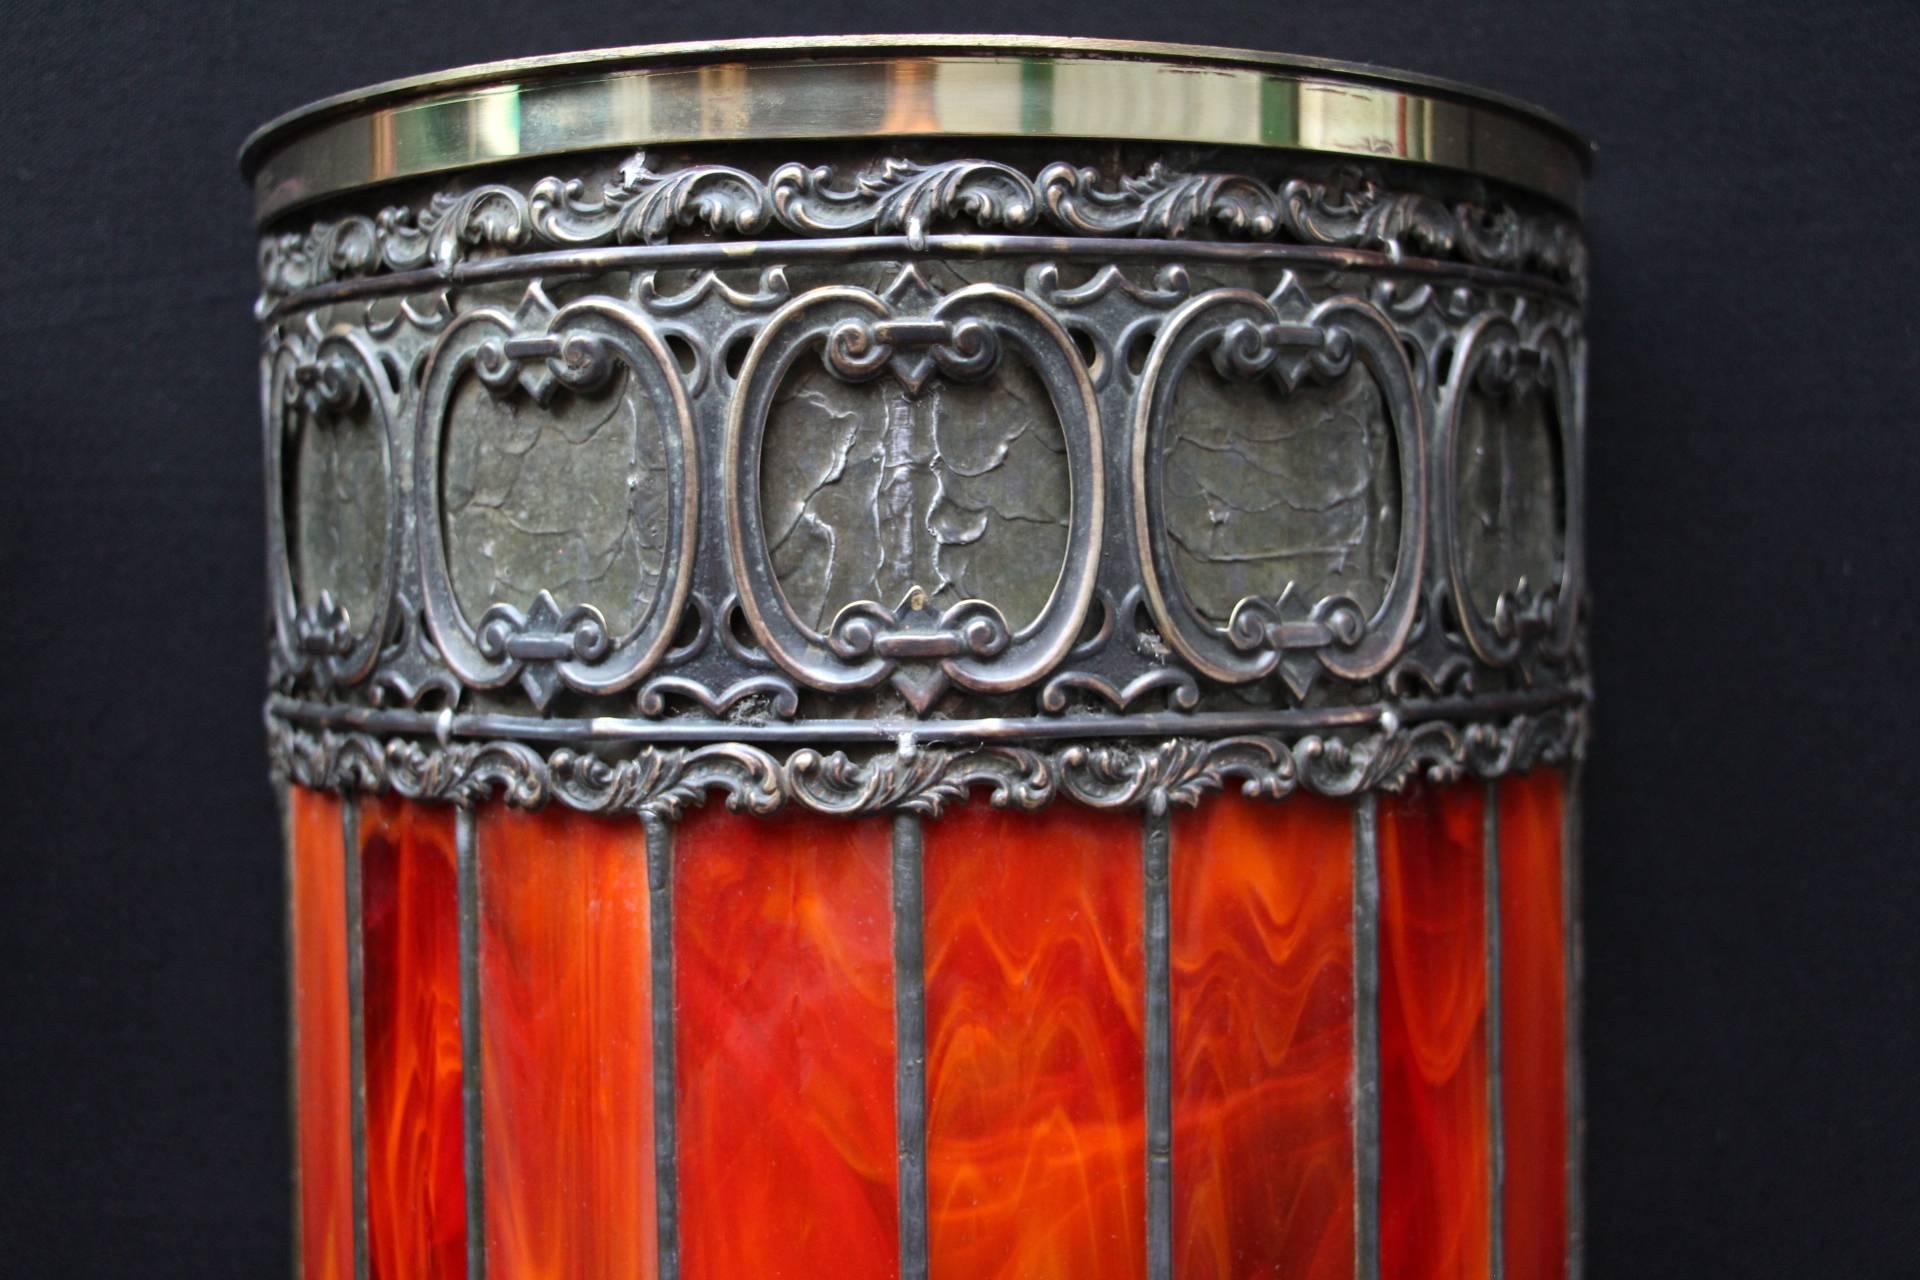 Exceptional pair of opalescent leaded glass wall light with half moon shape. They feature three sculptured copper friezes. They are red when the light is off and become vibrant red to orange when the light is on.
They have a red orange fire aspect.